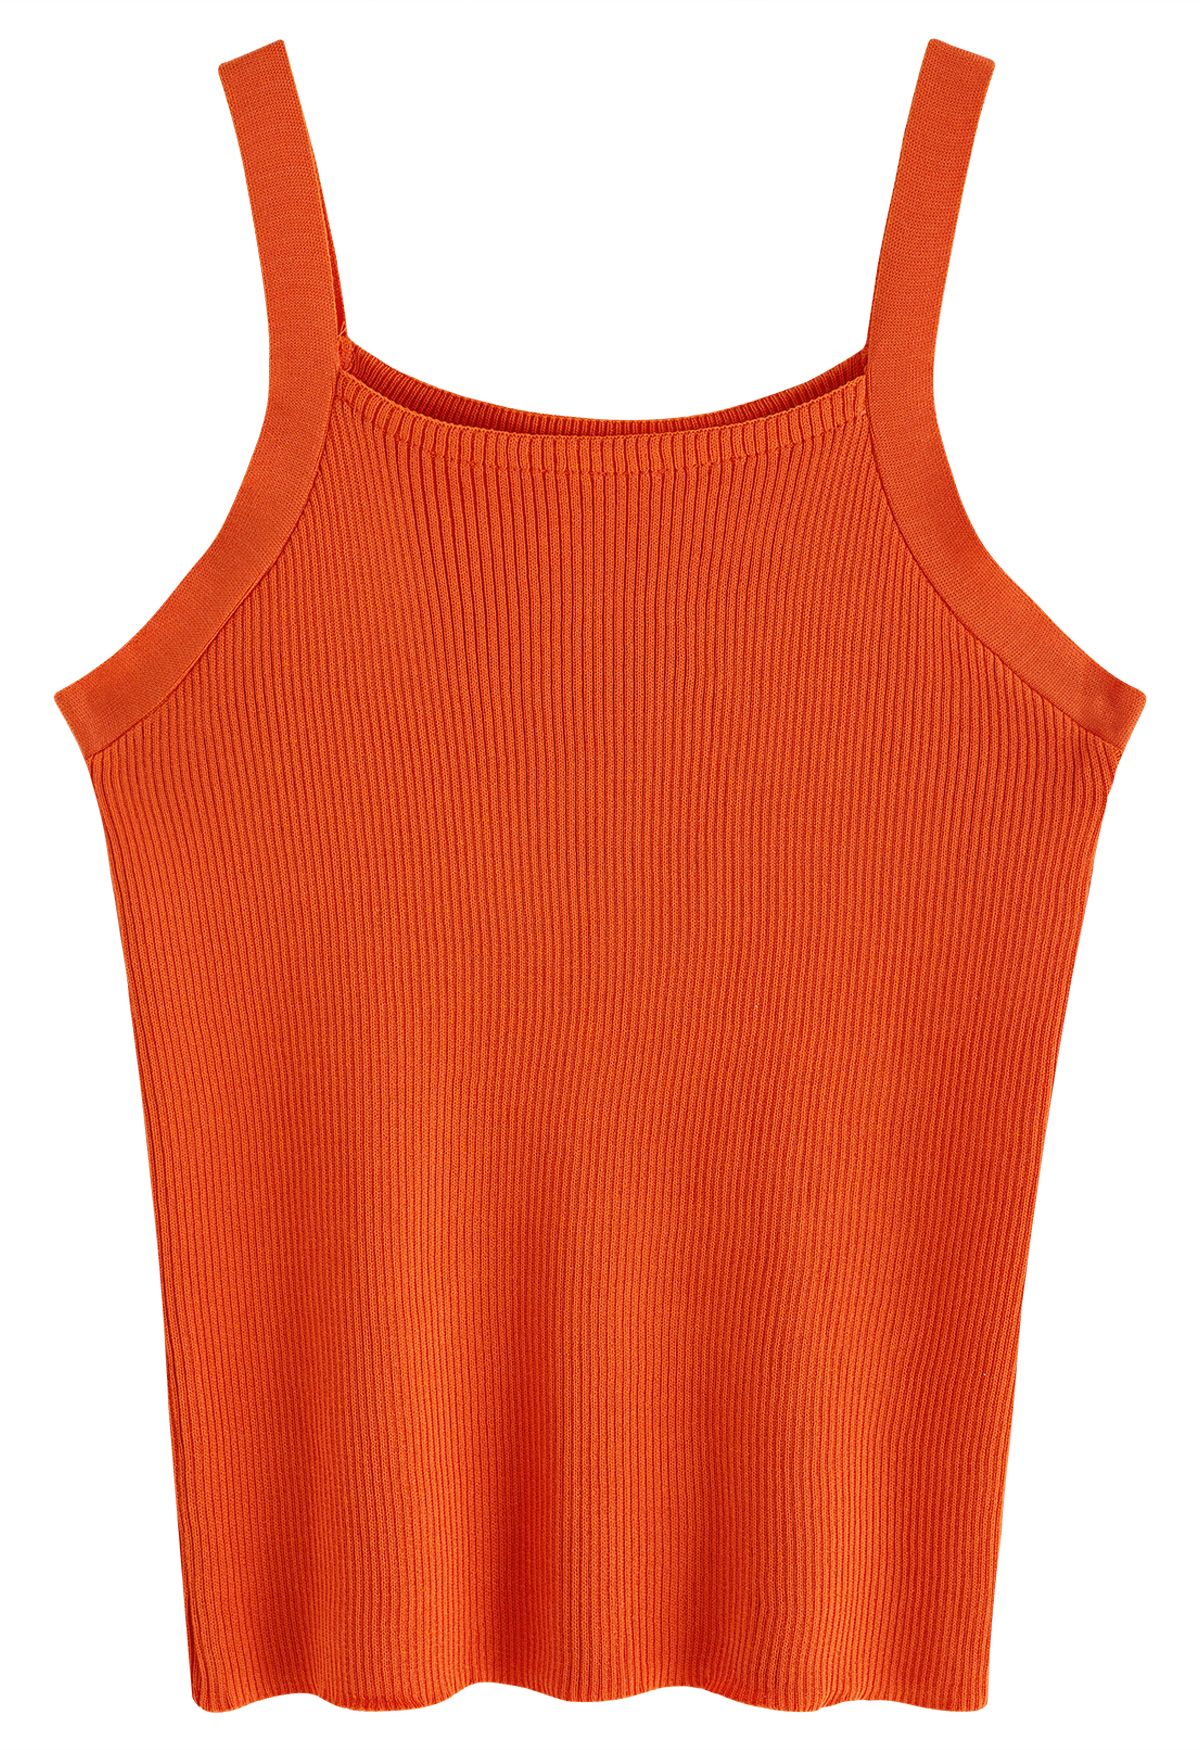 Stretchy Ribbed Knit Cami Top in Orange